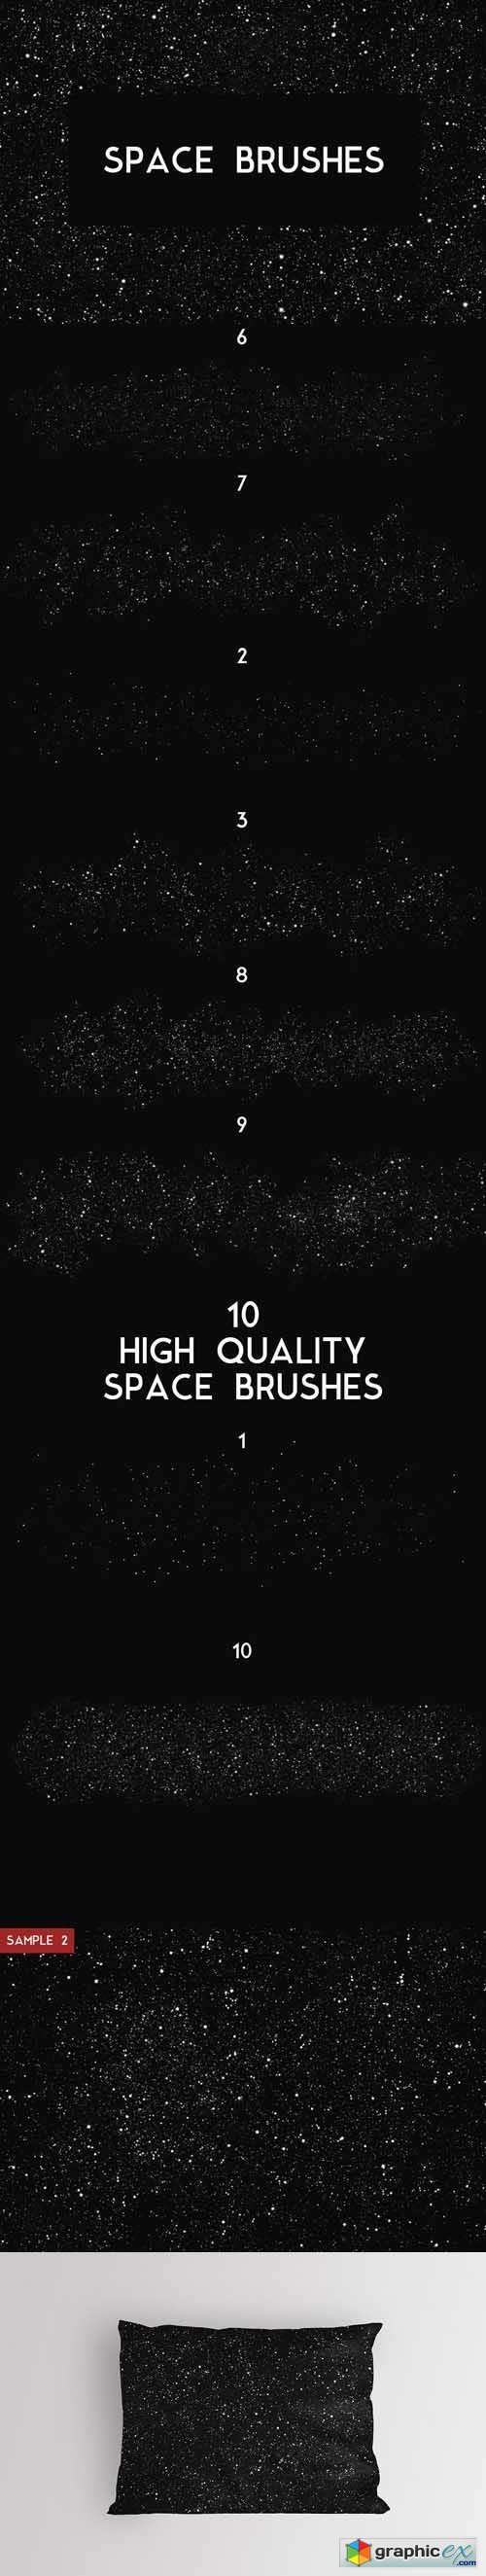 Space Brushes